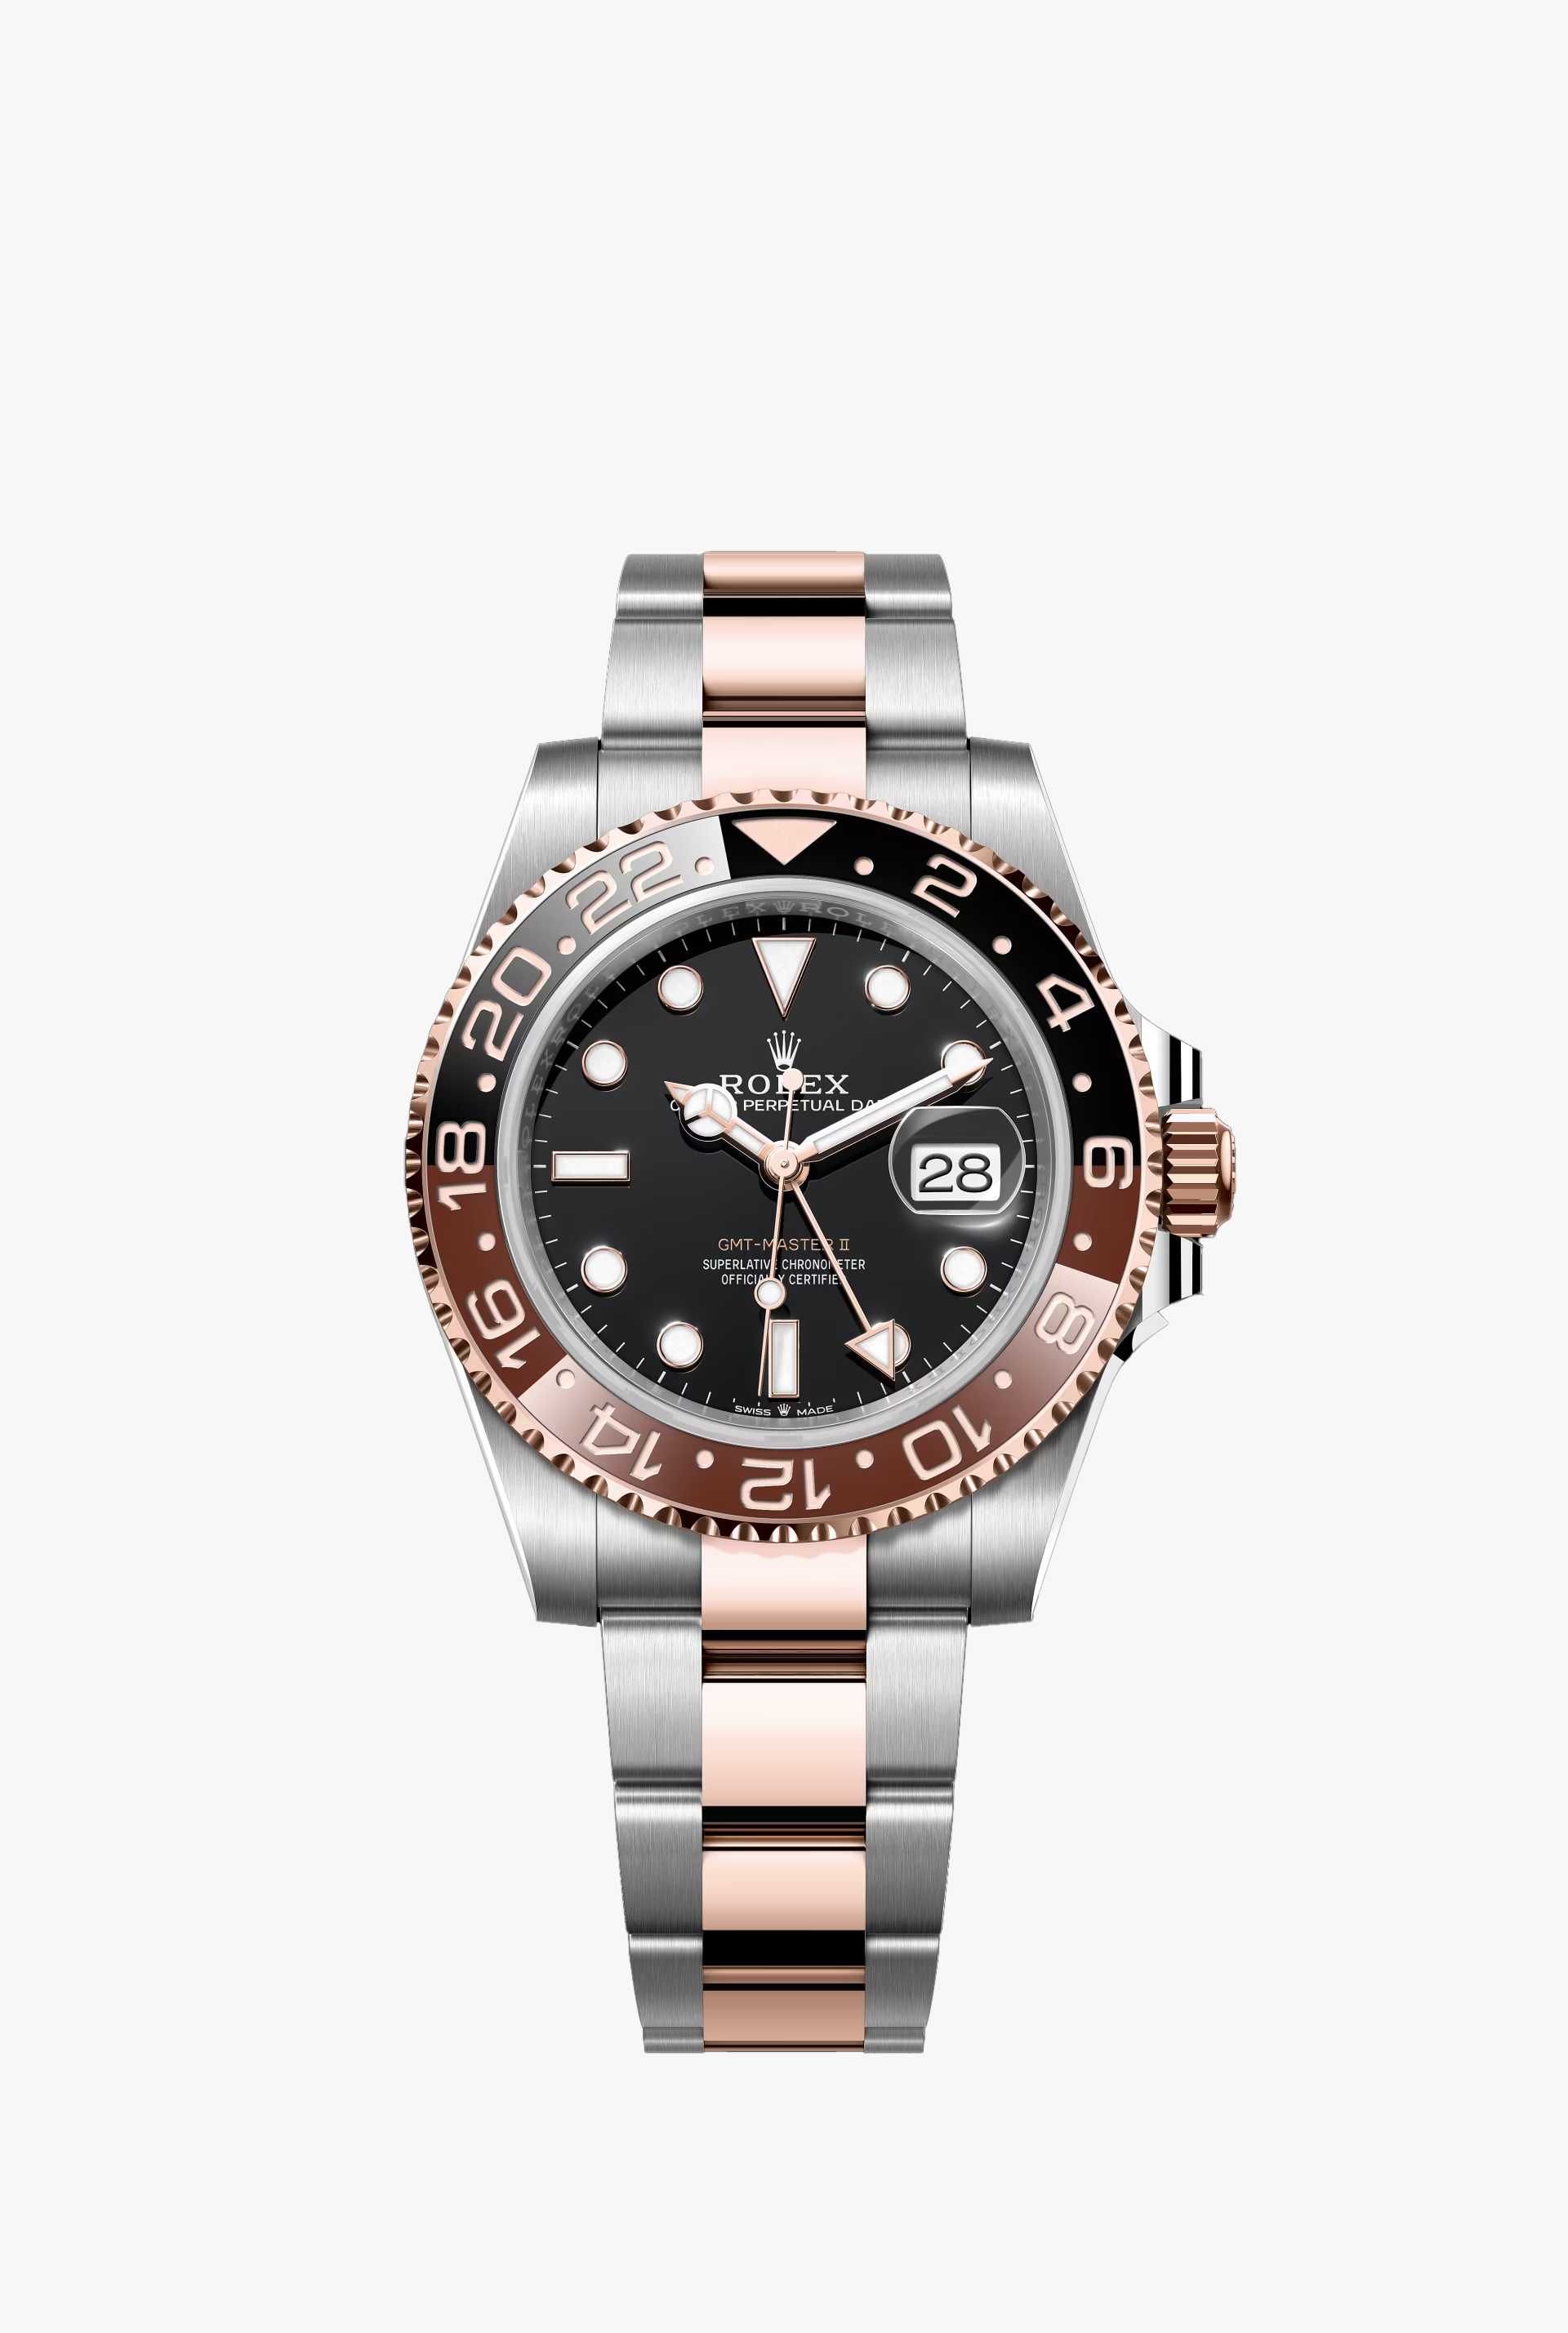 Rolex,GMT-Masterl Oyster,40 mm,Oystersteeland Everose gold Reference 126711CHNR